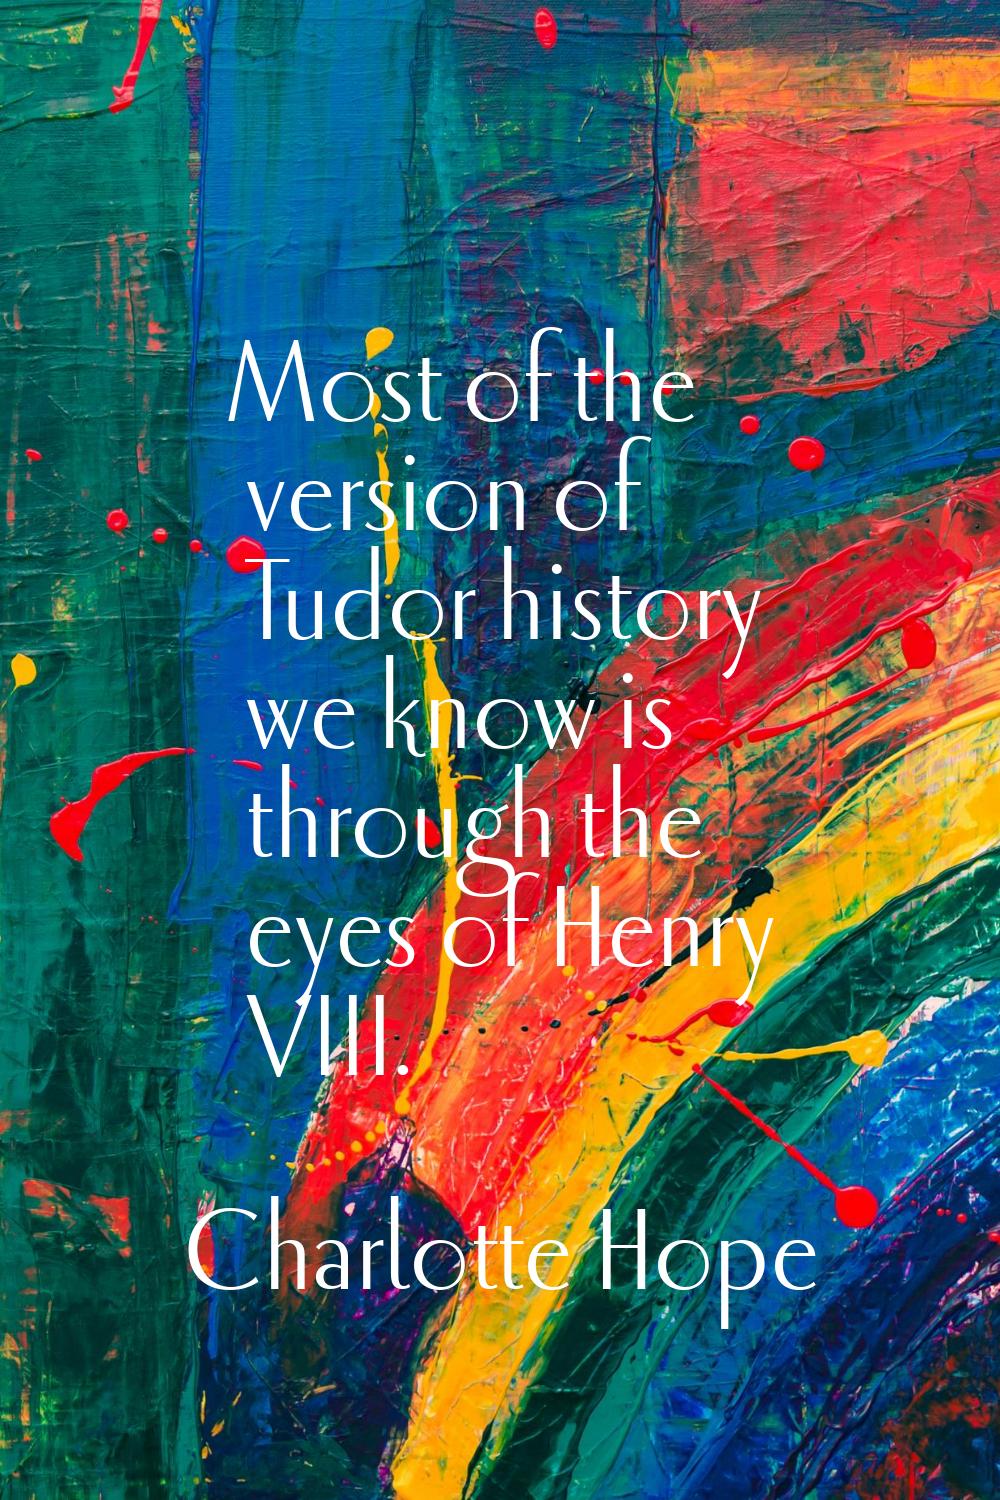 Most of the version of Tudor history we know is through the eyes of Henry VIII.